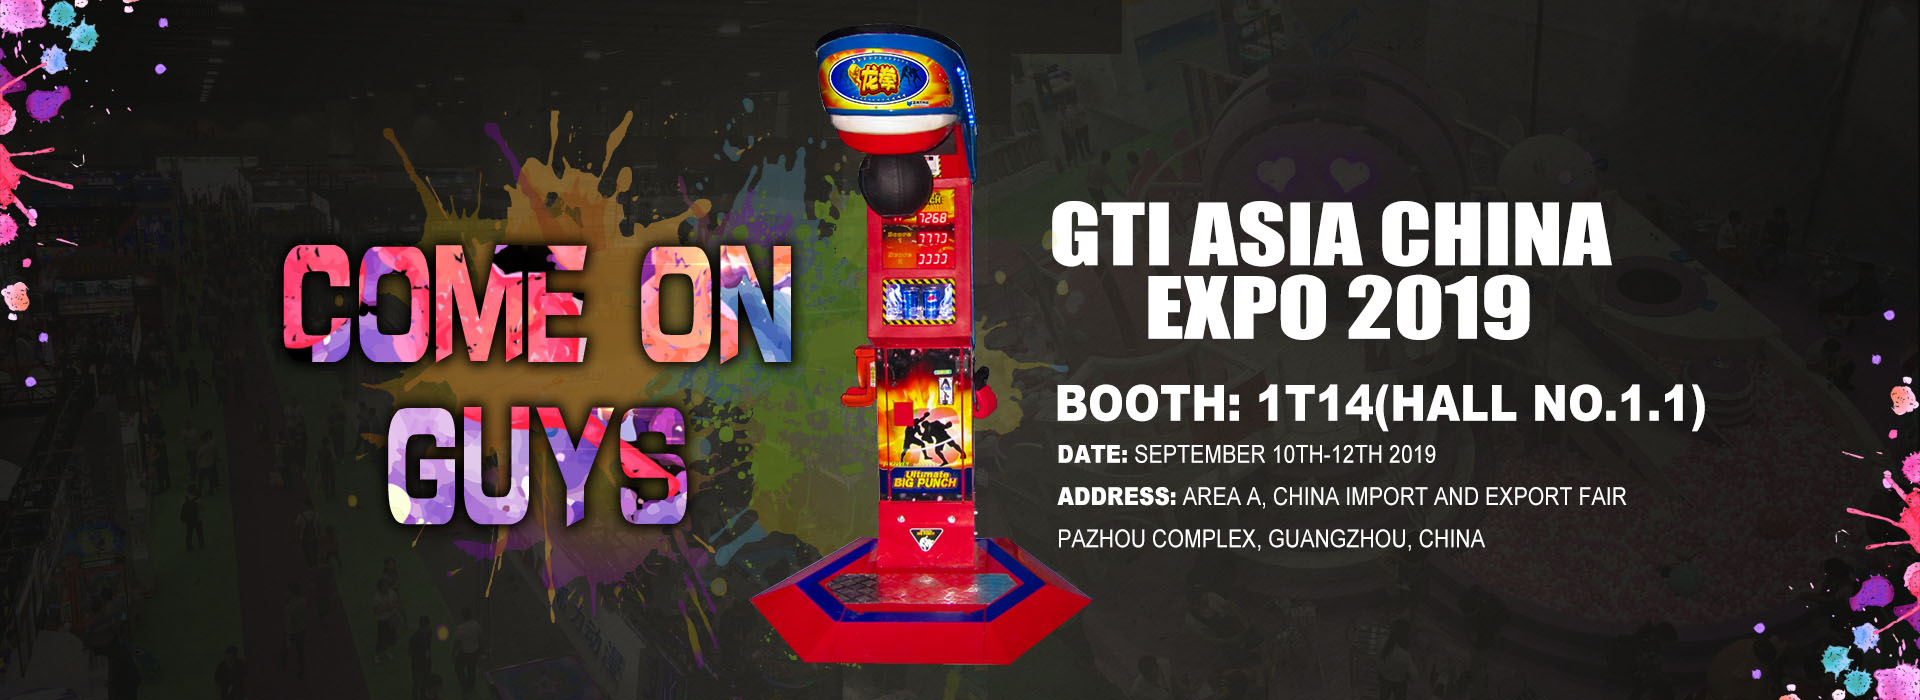 GTI Asia China Expo 2019, Neofuns Invites You to Join in this Exhibition.